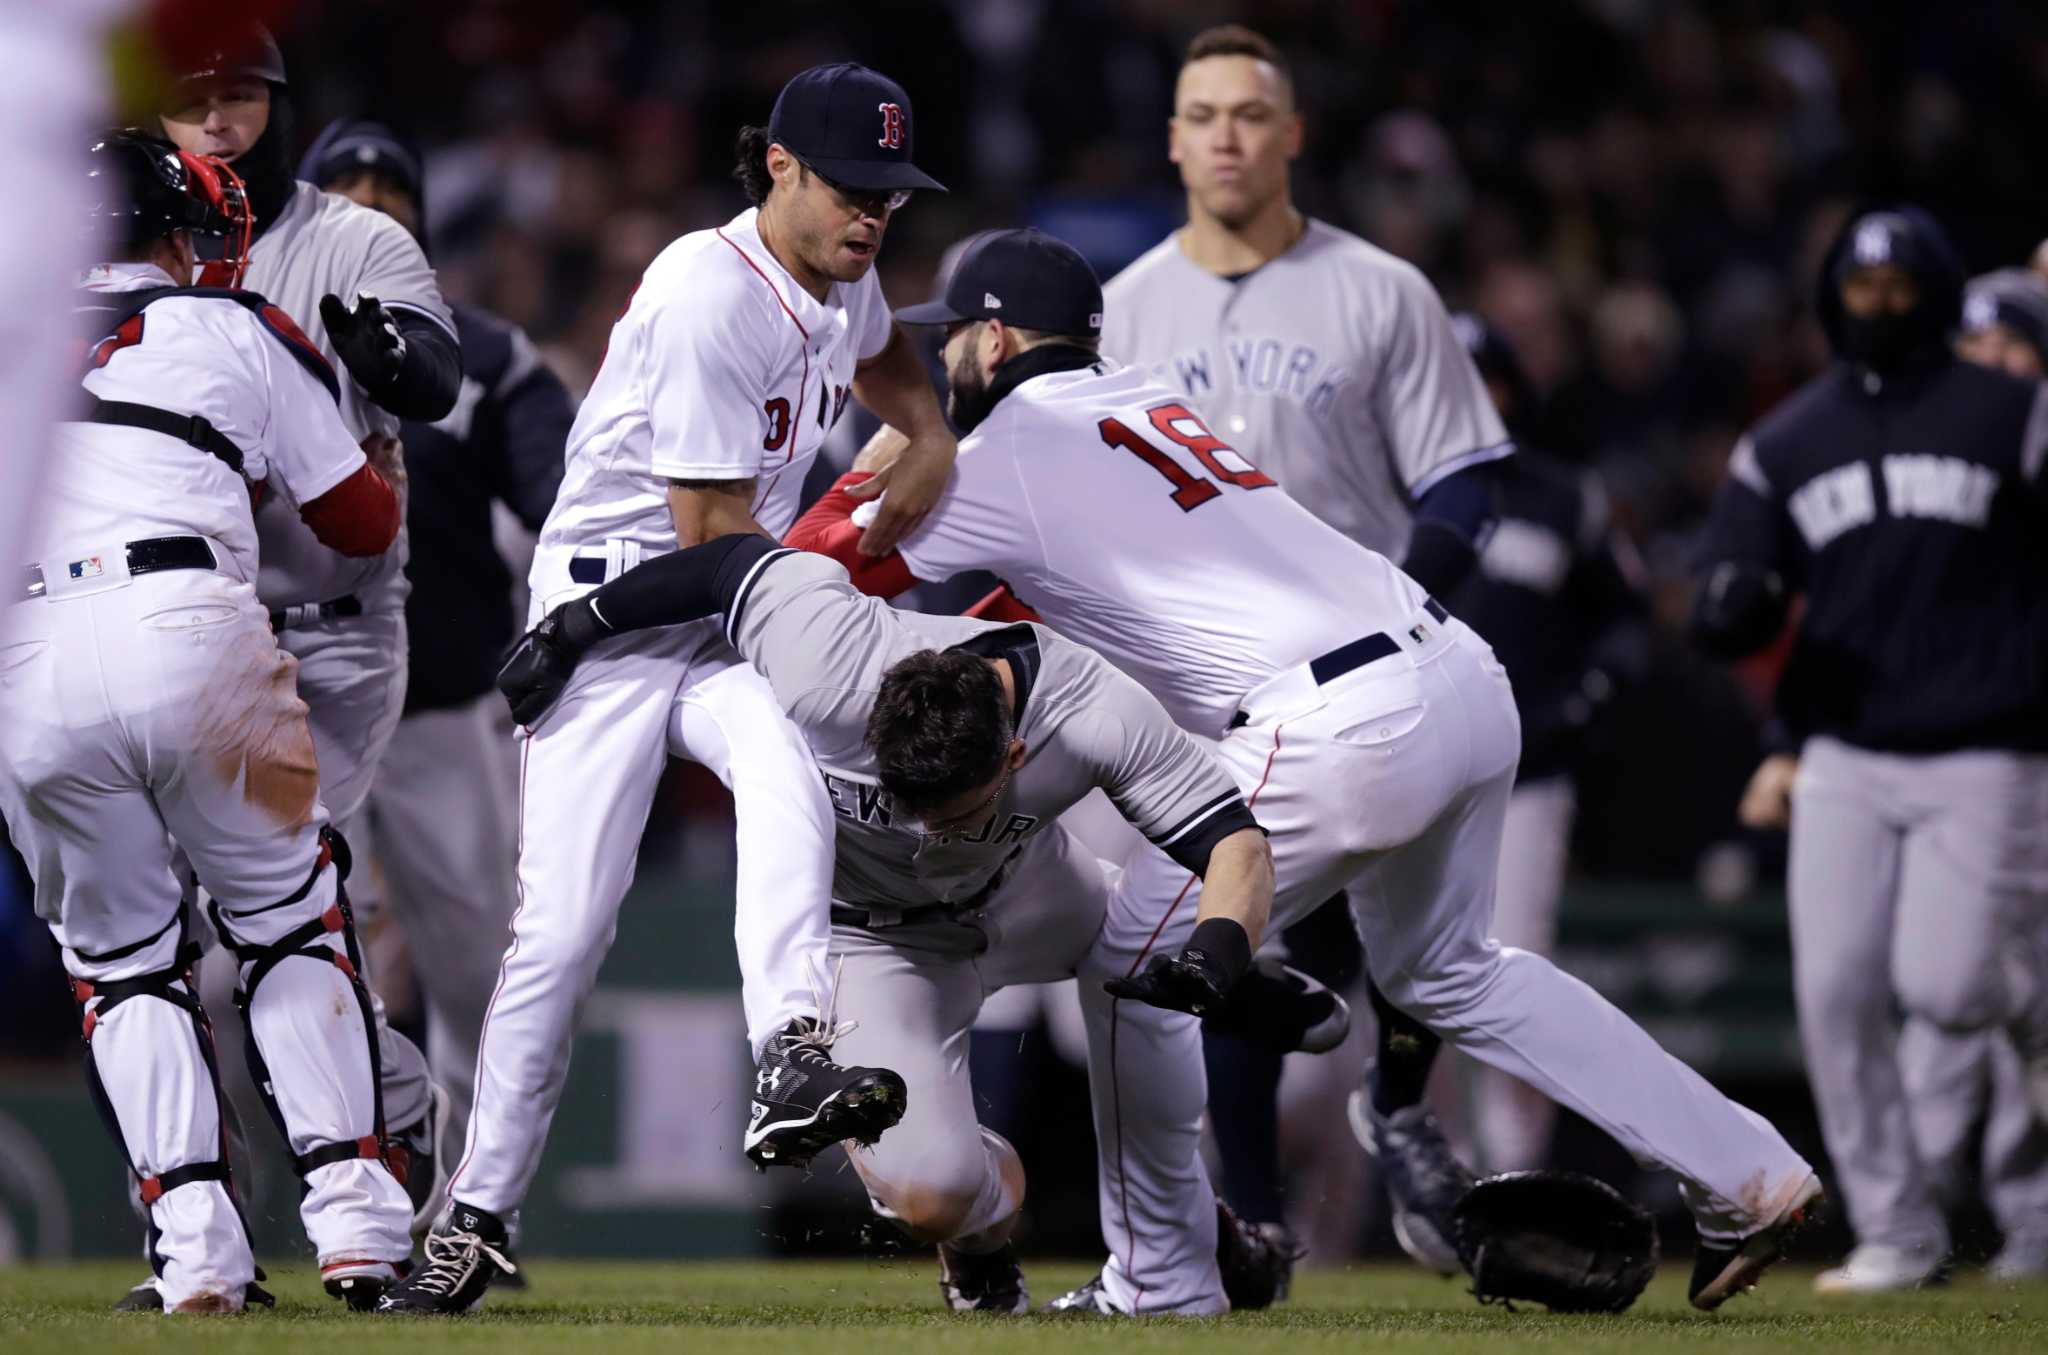 Brawl is just what Red Sox-Yankees rivalry needed - The Boston Globe